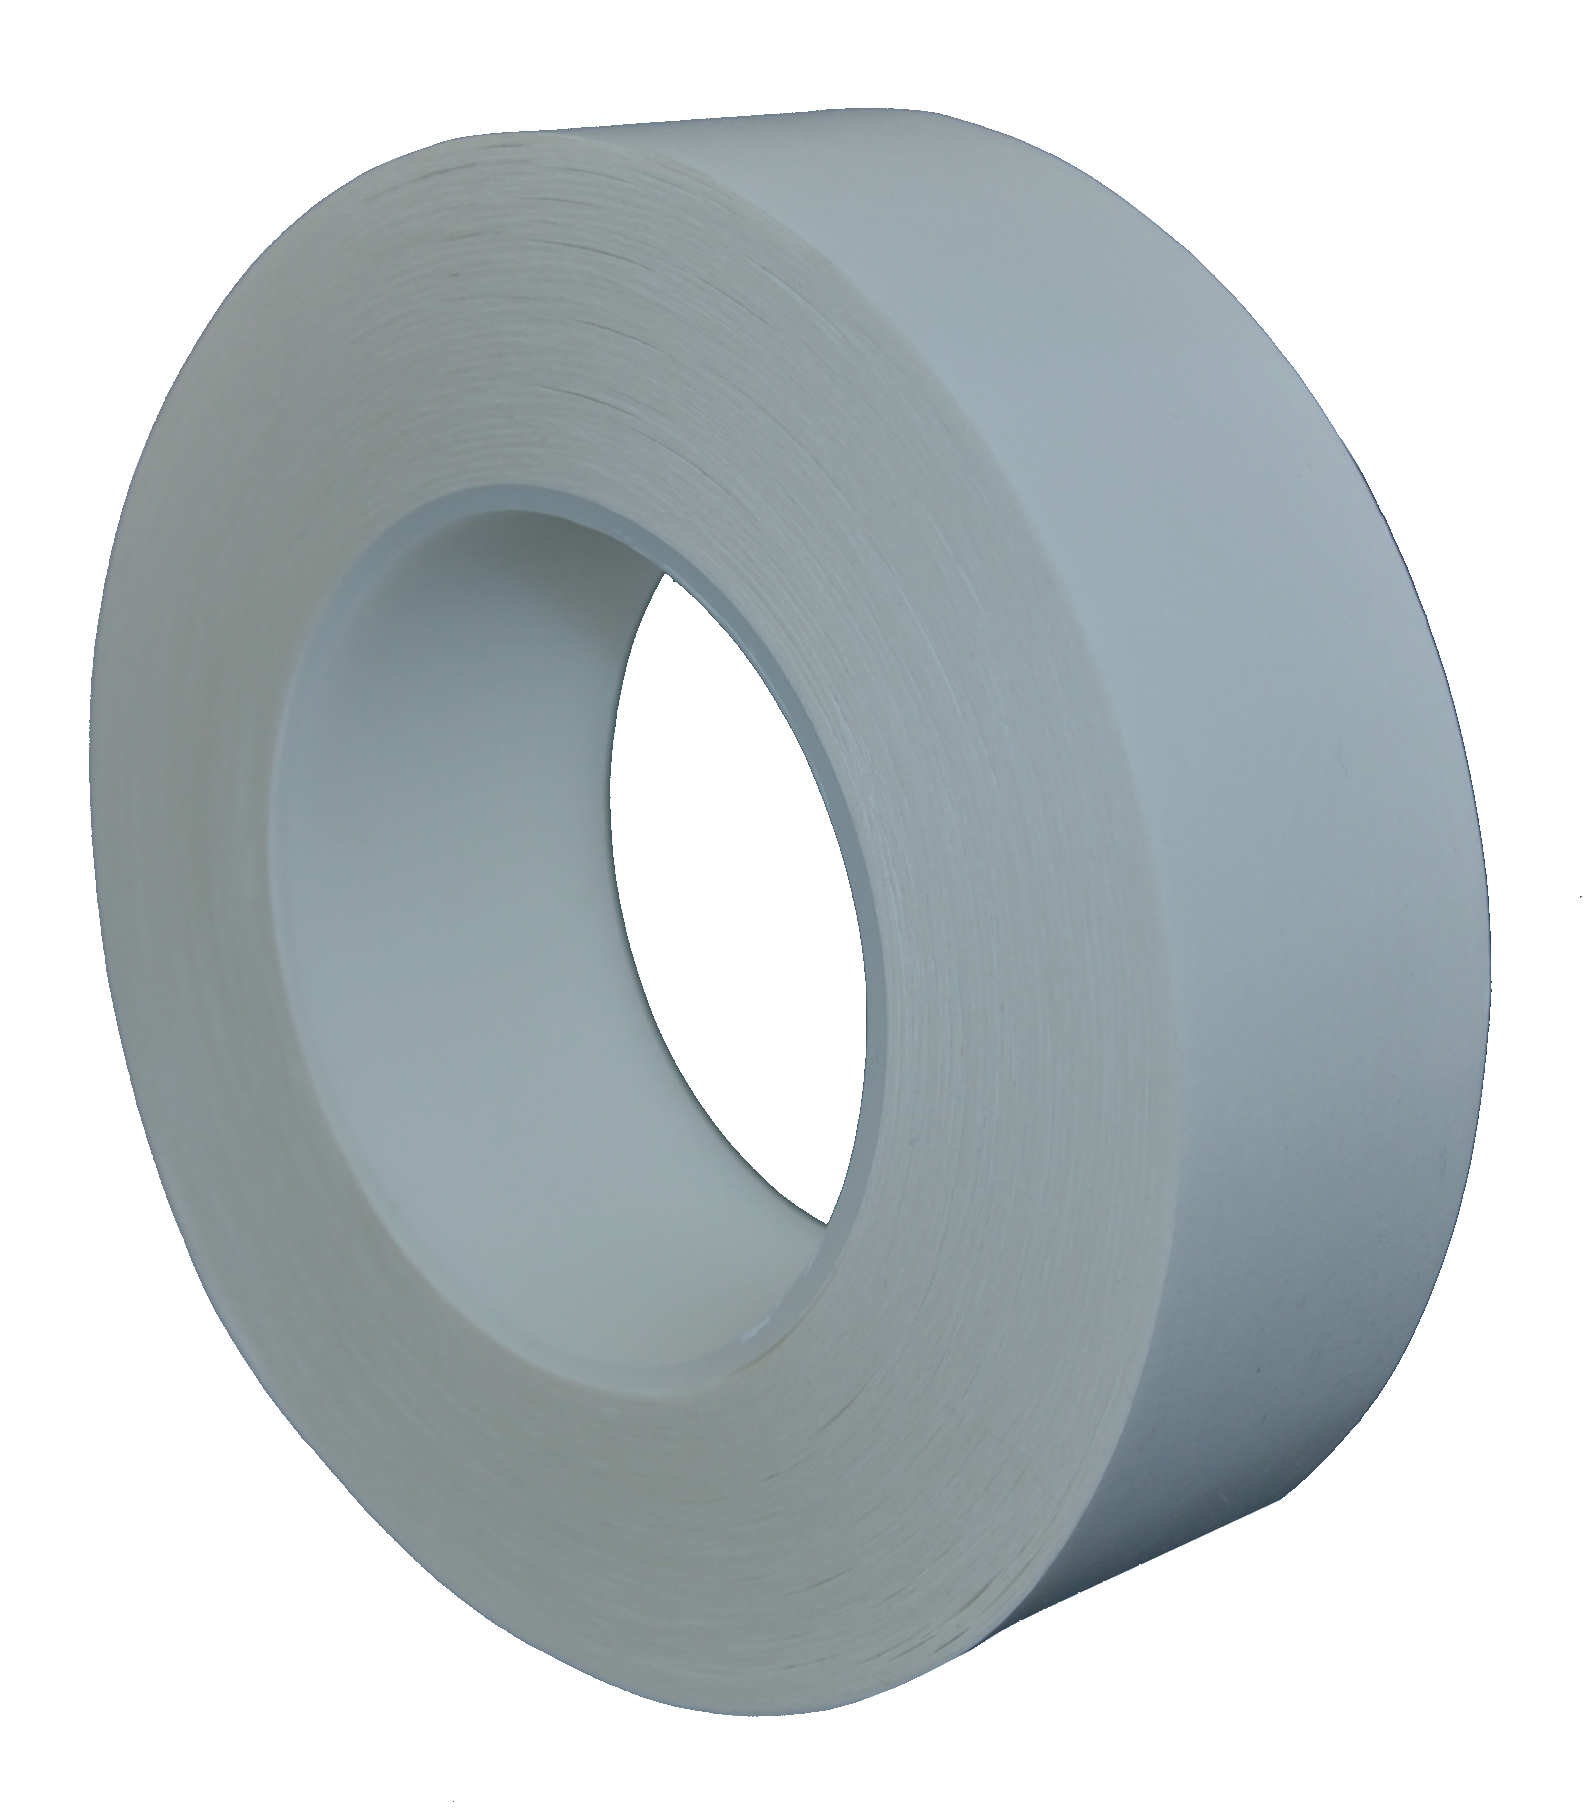 S-K-S dubbelzijdig plakband met polyester drager 480, transparant, 19 mm x 50 m, 0,09 mm